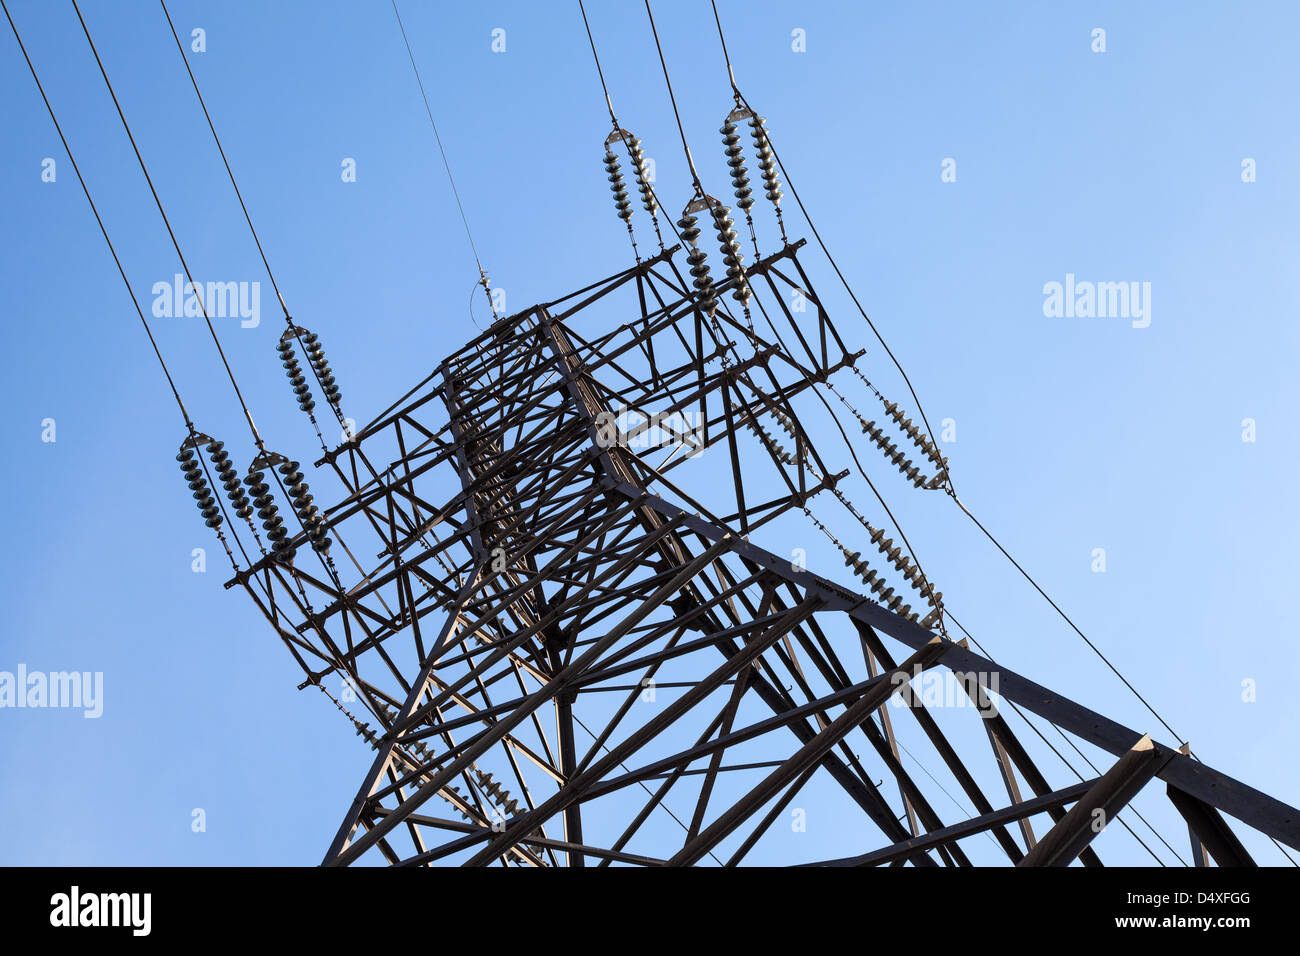 High voltage power lines and big pylon in front of clear blue sky Stock Photo